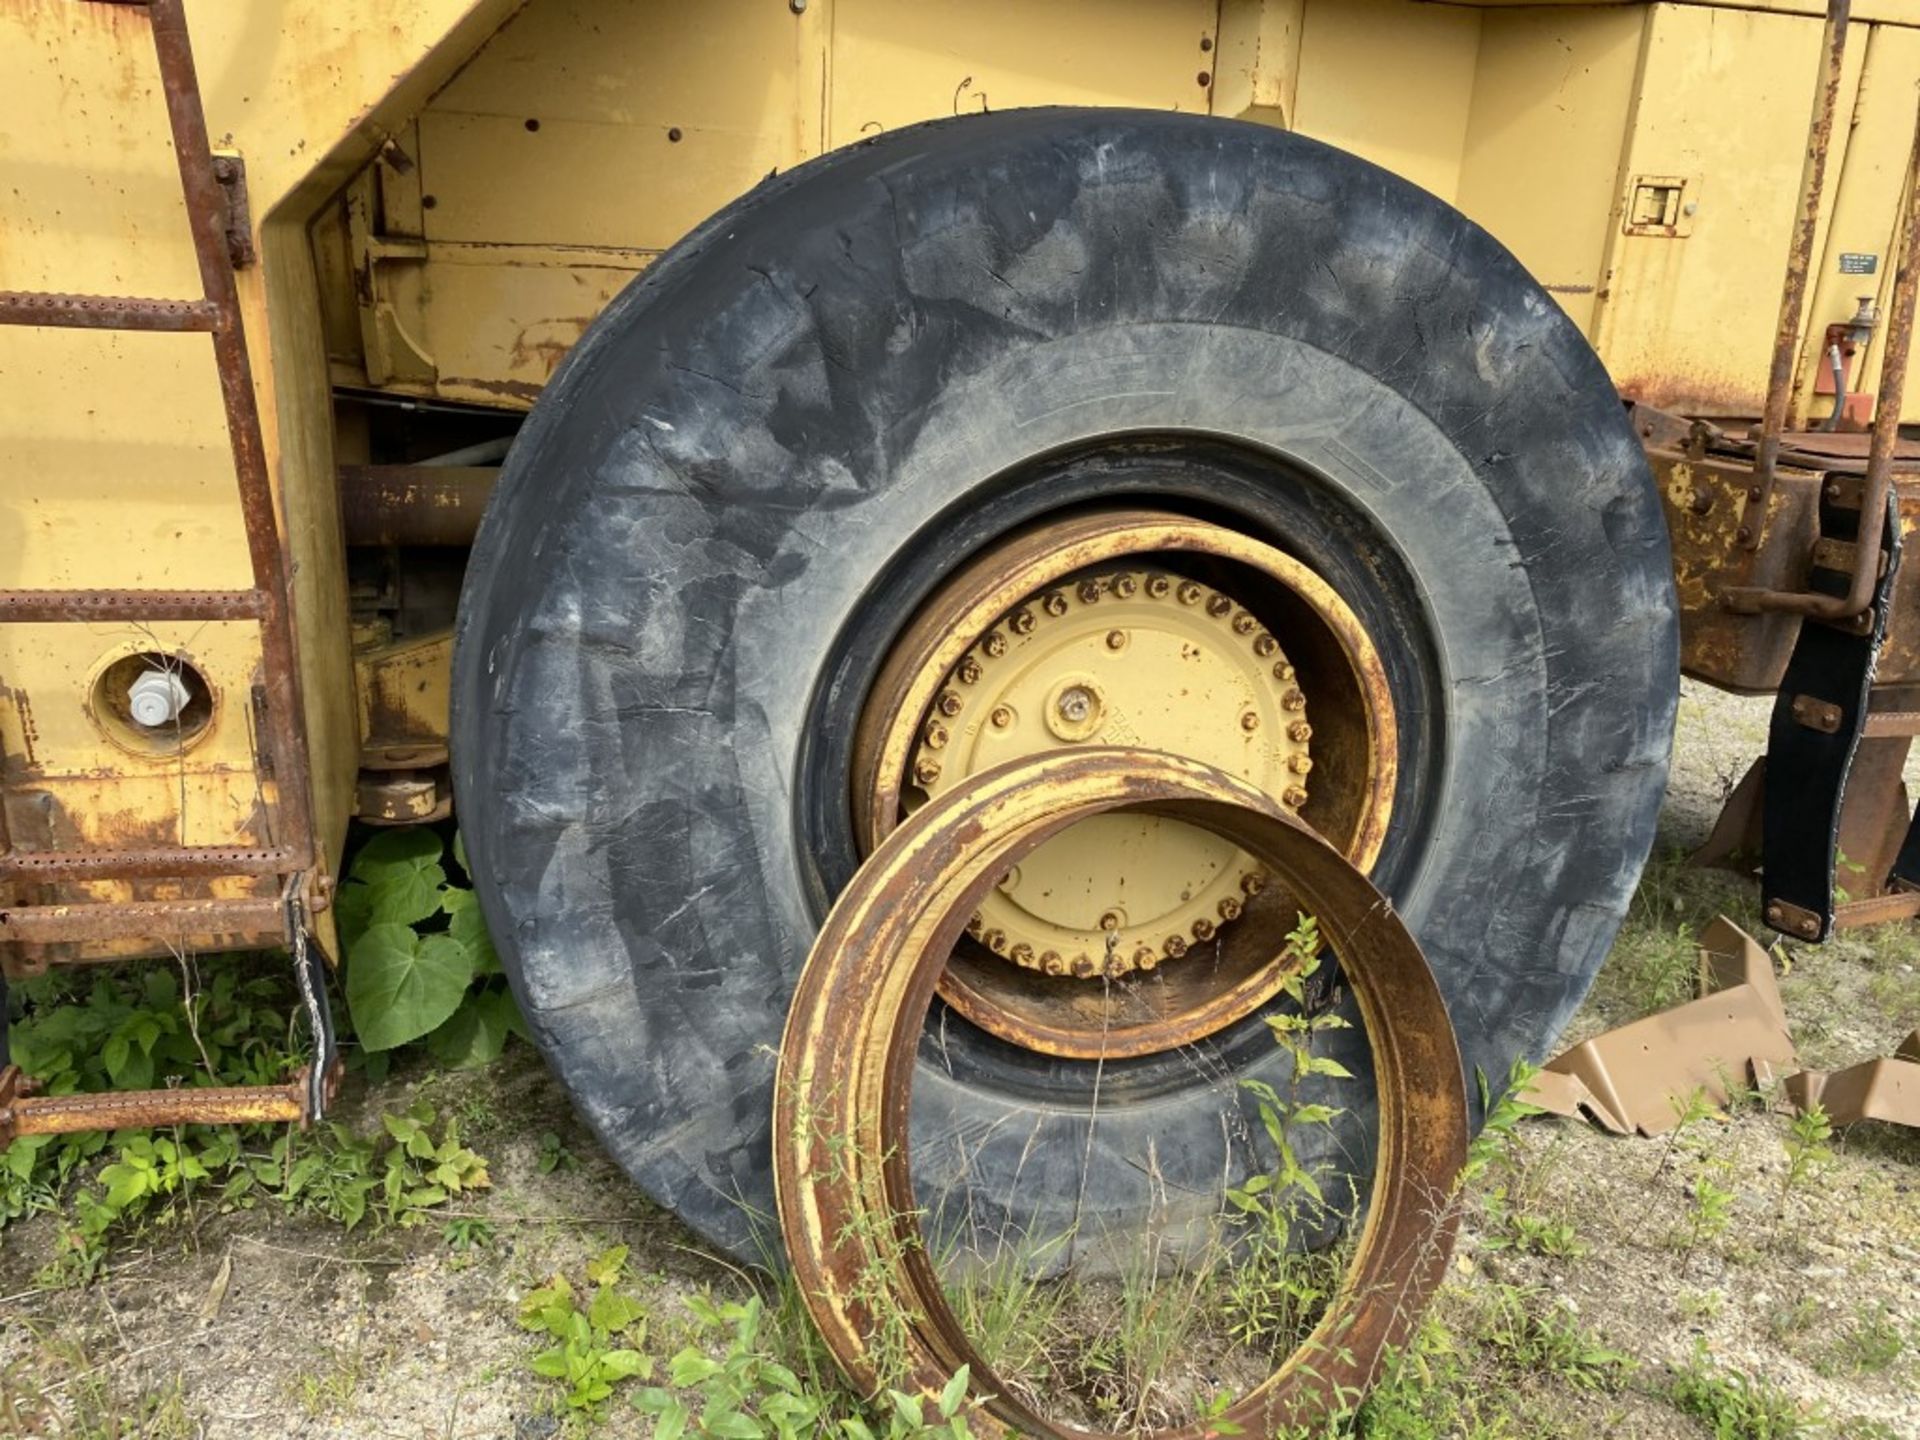 1998 CATERPILLAR 988F ARTICULATED WHEEL LOADER, ENCLOSED CAB, S/N: 8Y601152, 39,457 HOURS, PARTS - Image 11 of 18